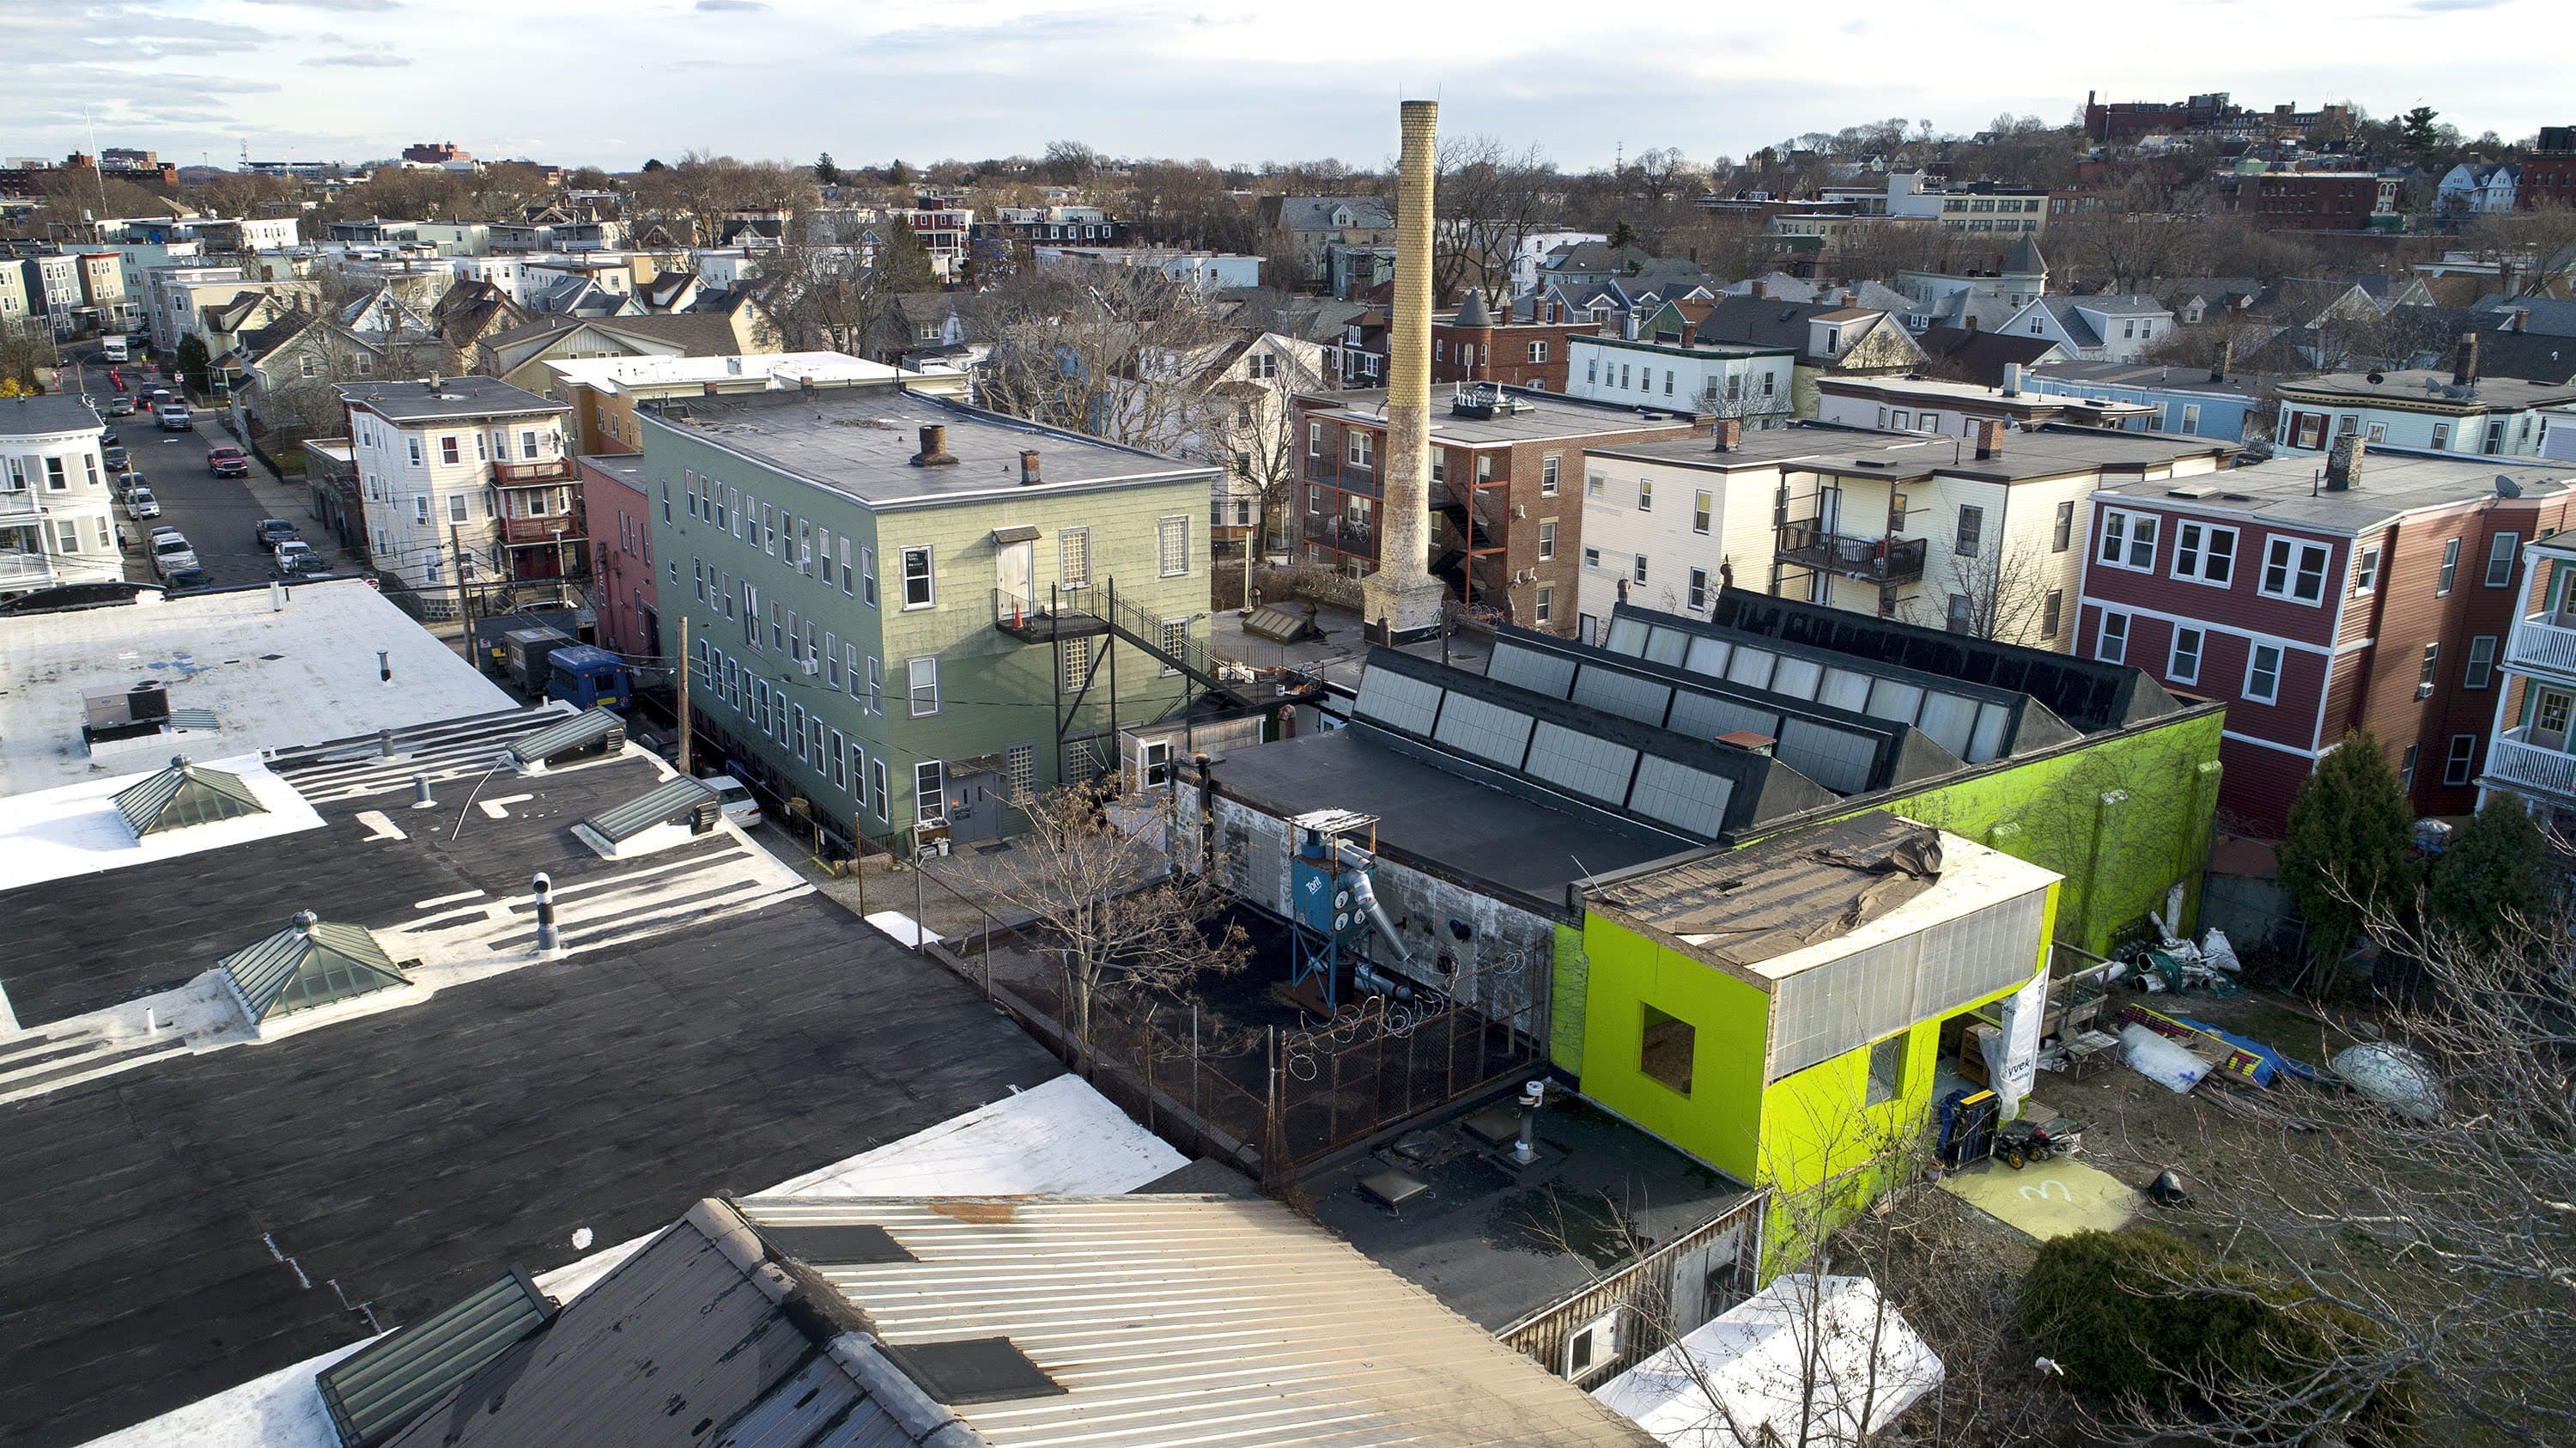 Humphreys Street Studios, with their landmark chimney and mostly green painted buildings, which were once a laundry facility in Dorchester, Mass. (Robin Lubbock/WBUR)